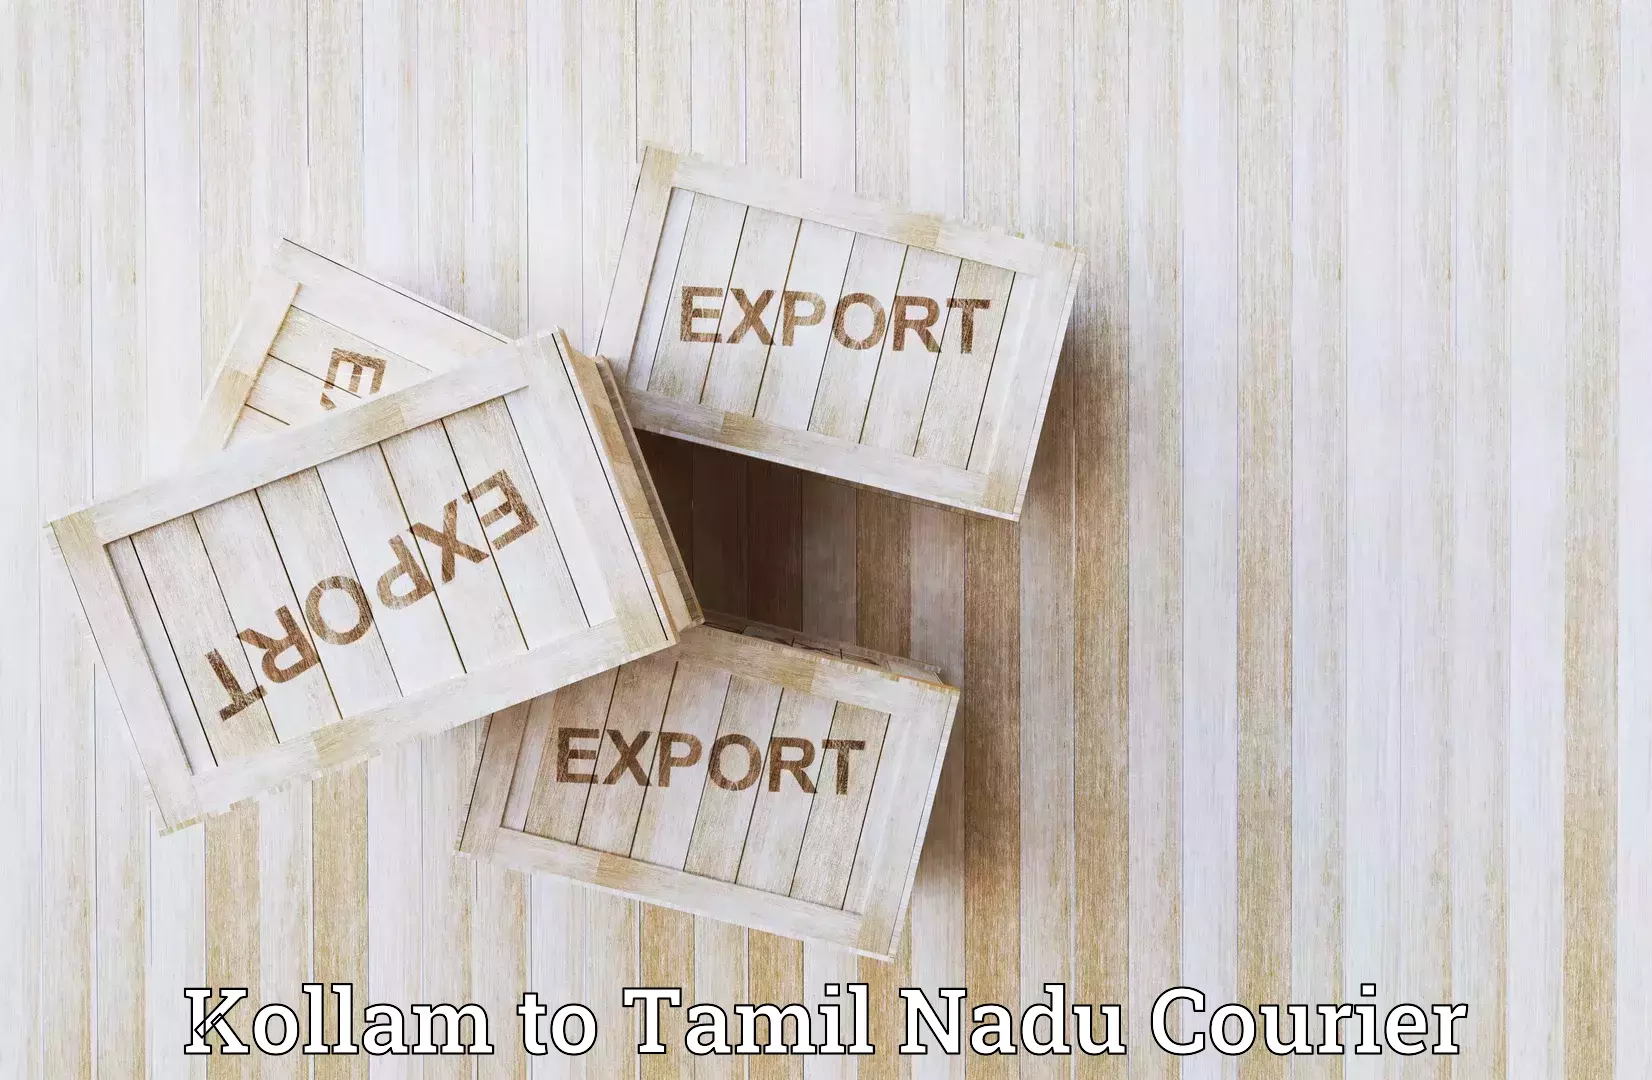 Global courier networks Kollam to Ennore Port Chennai